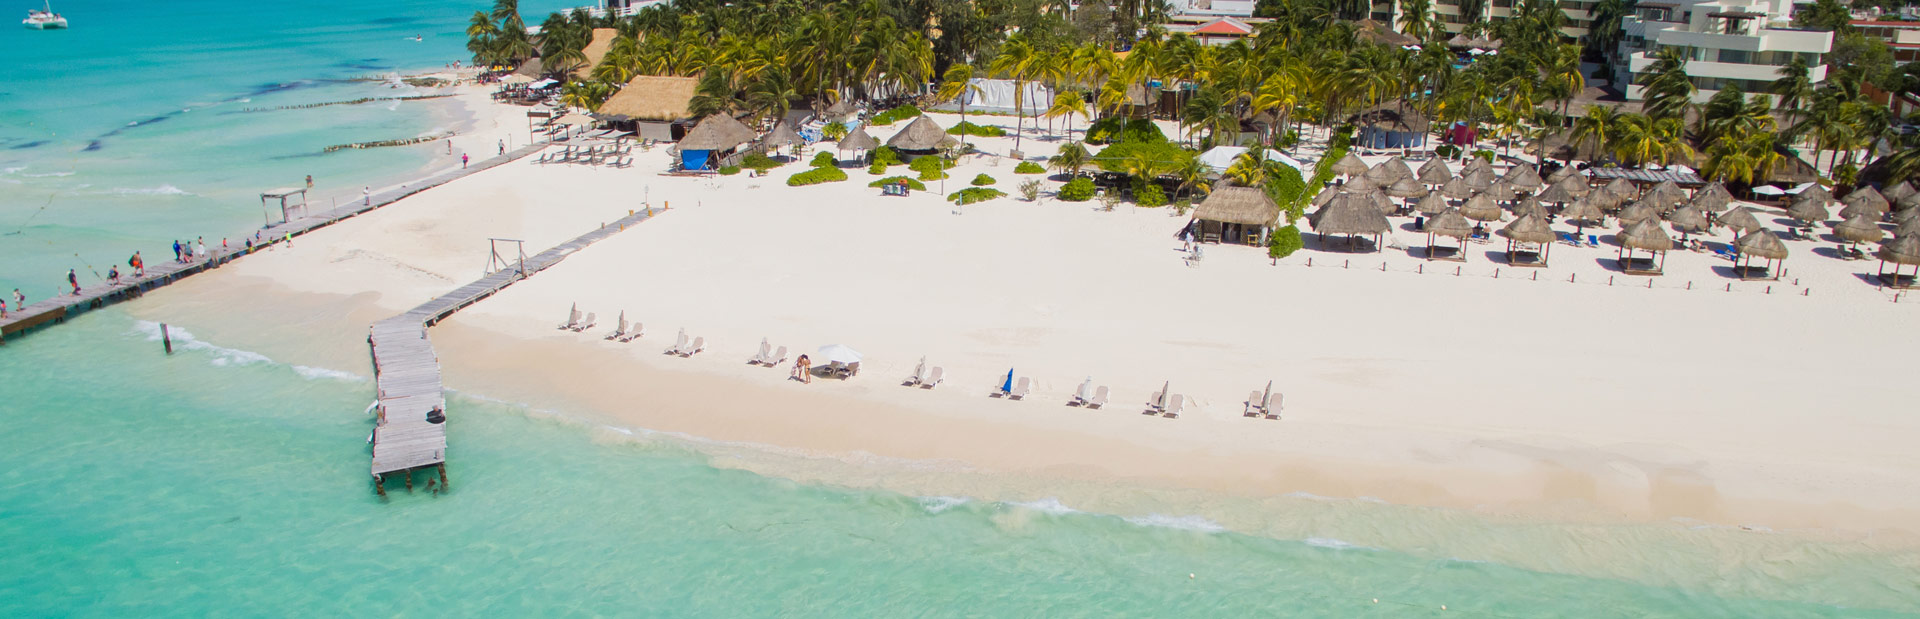 North Beach on Isla Mujeres from a drone view